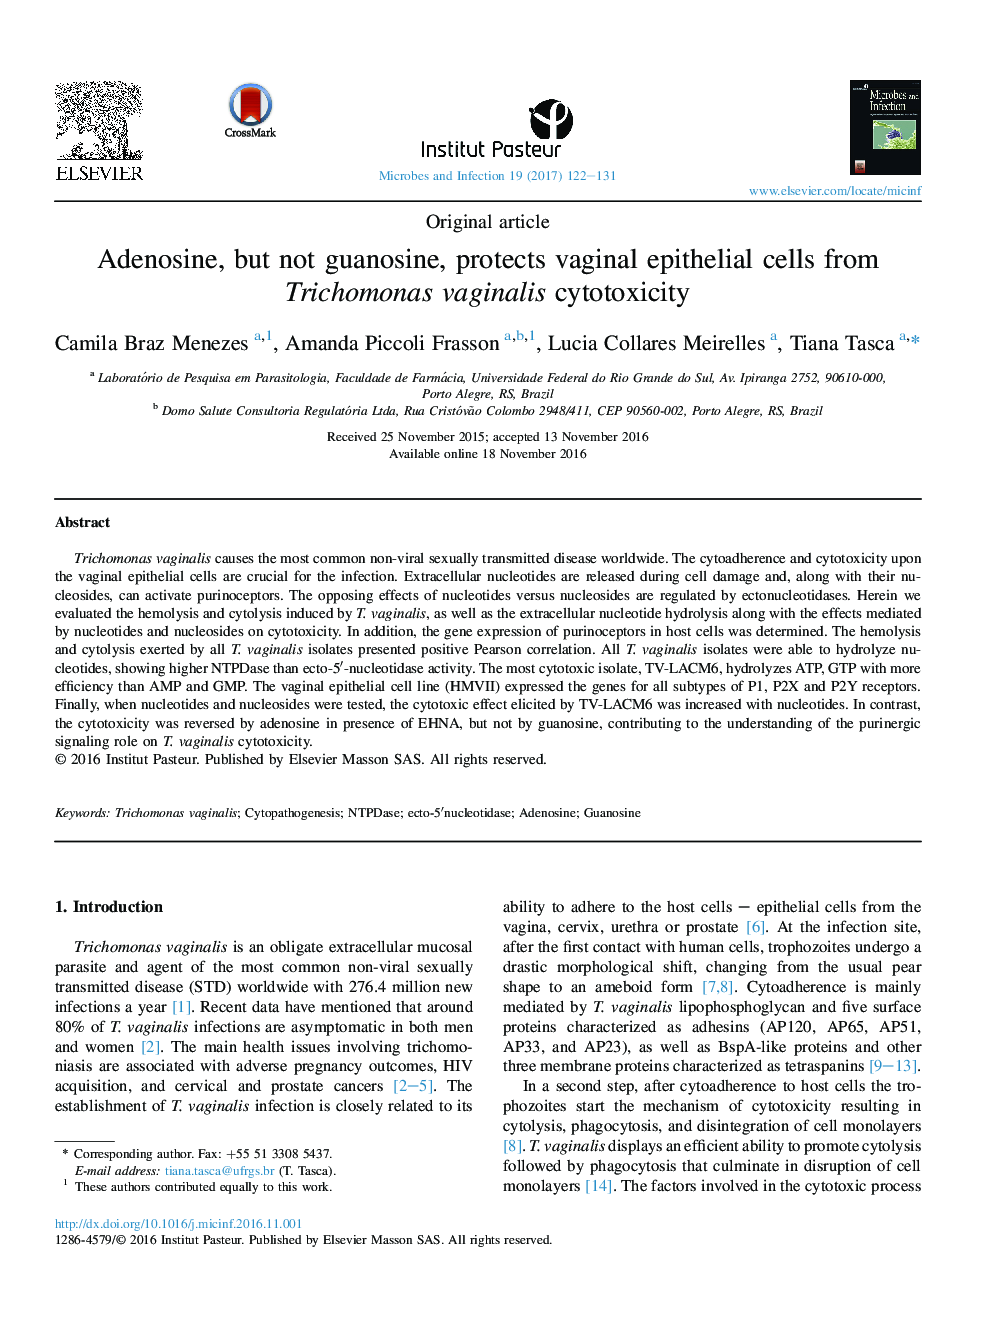 Adenosine, but not guanosine, protects vaginal epithelial cells from Trichomonas vaginalis cytotoxicity